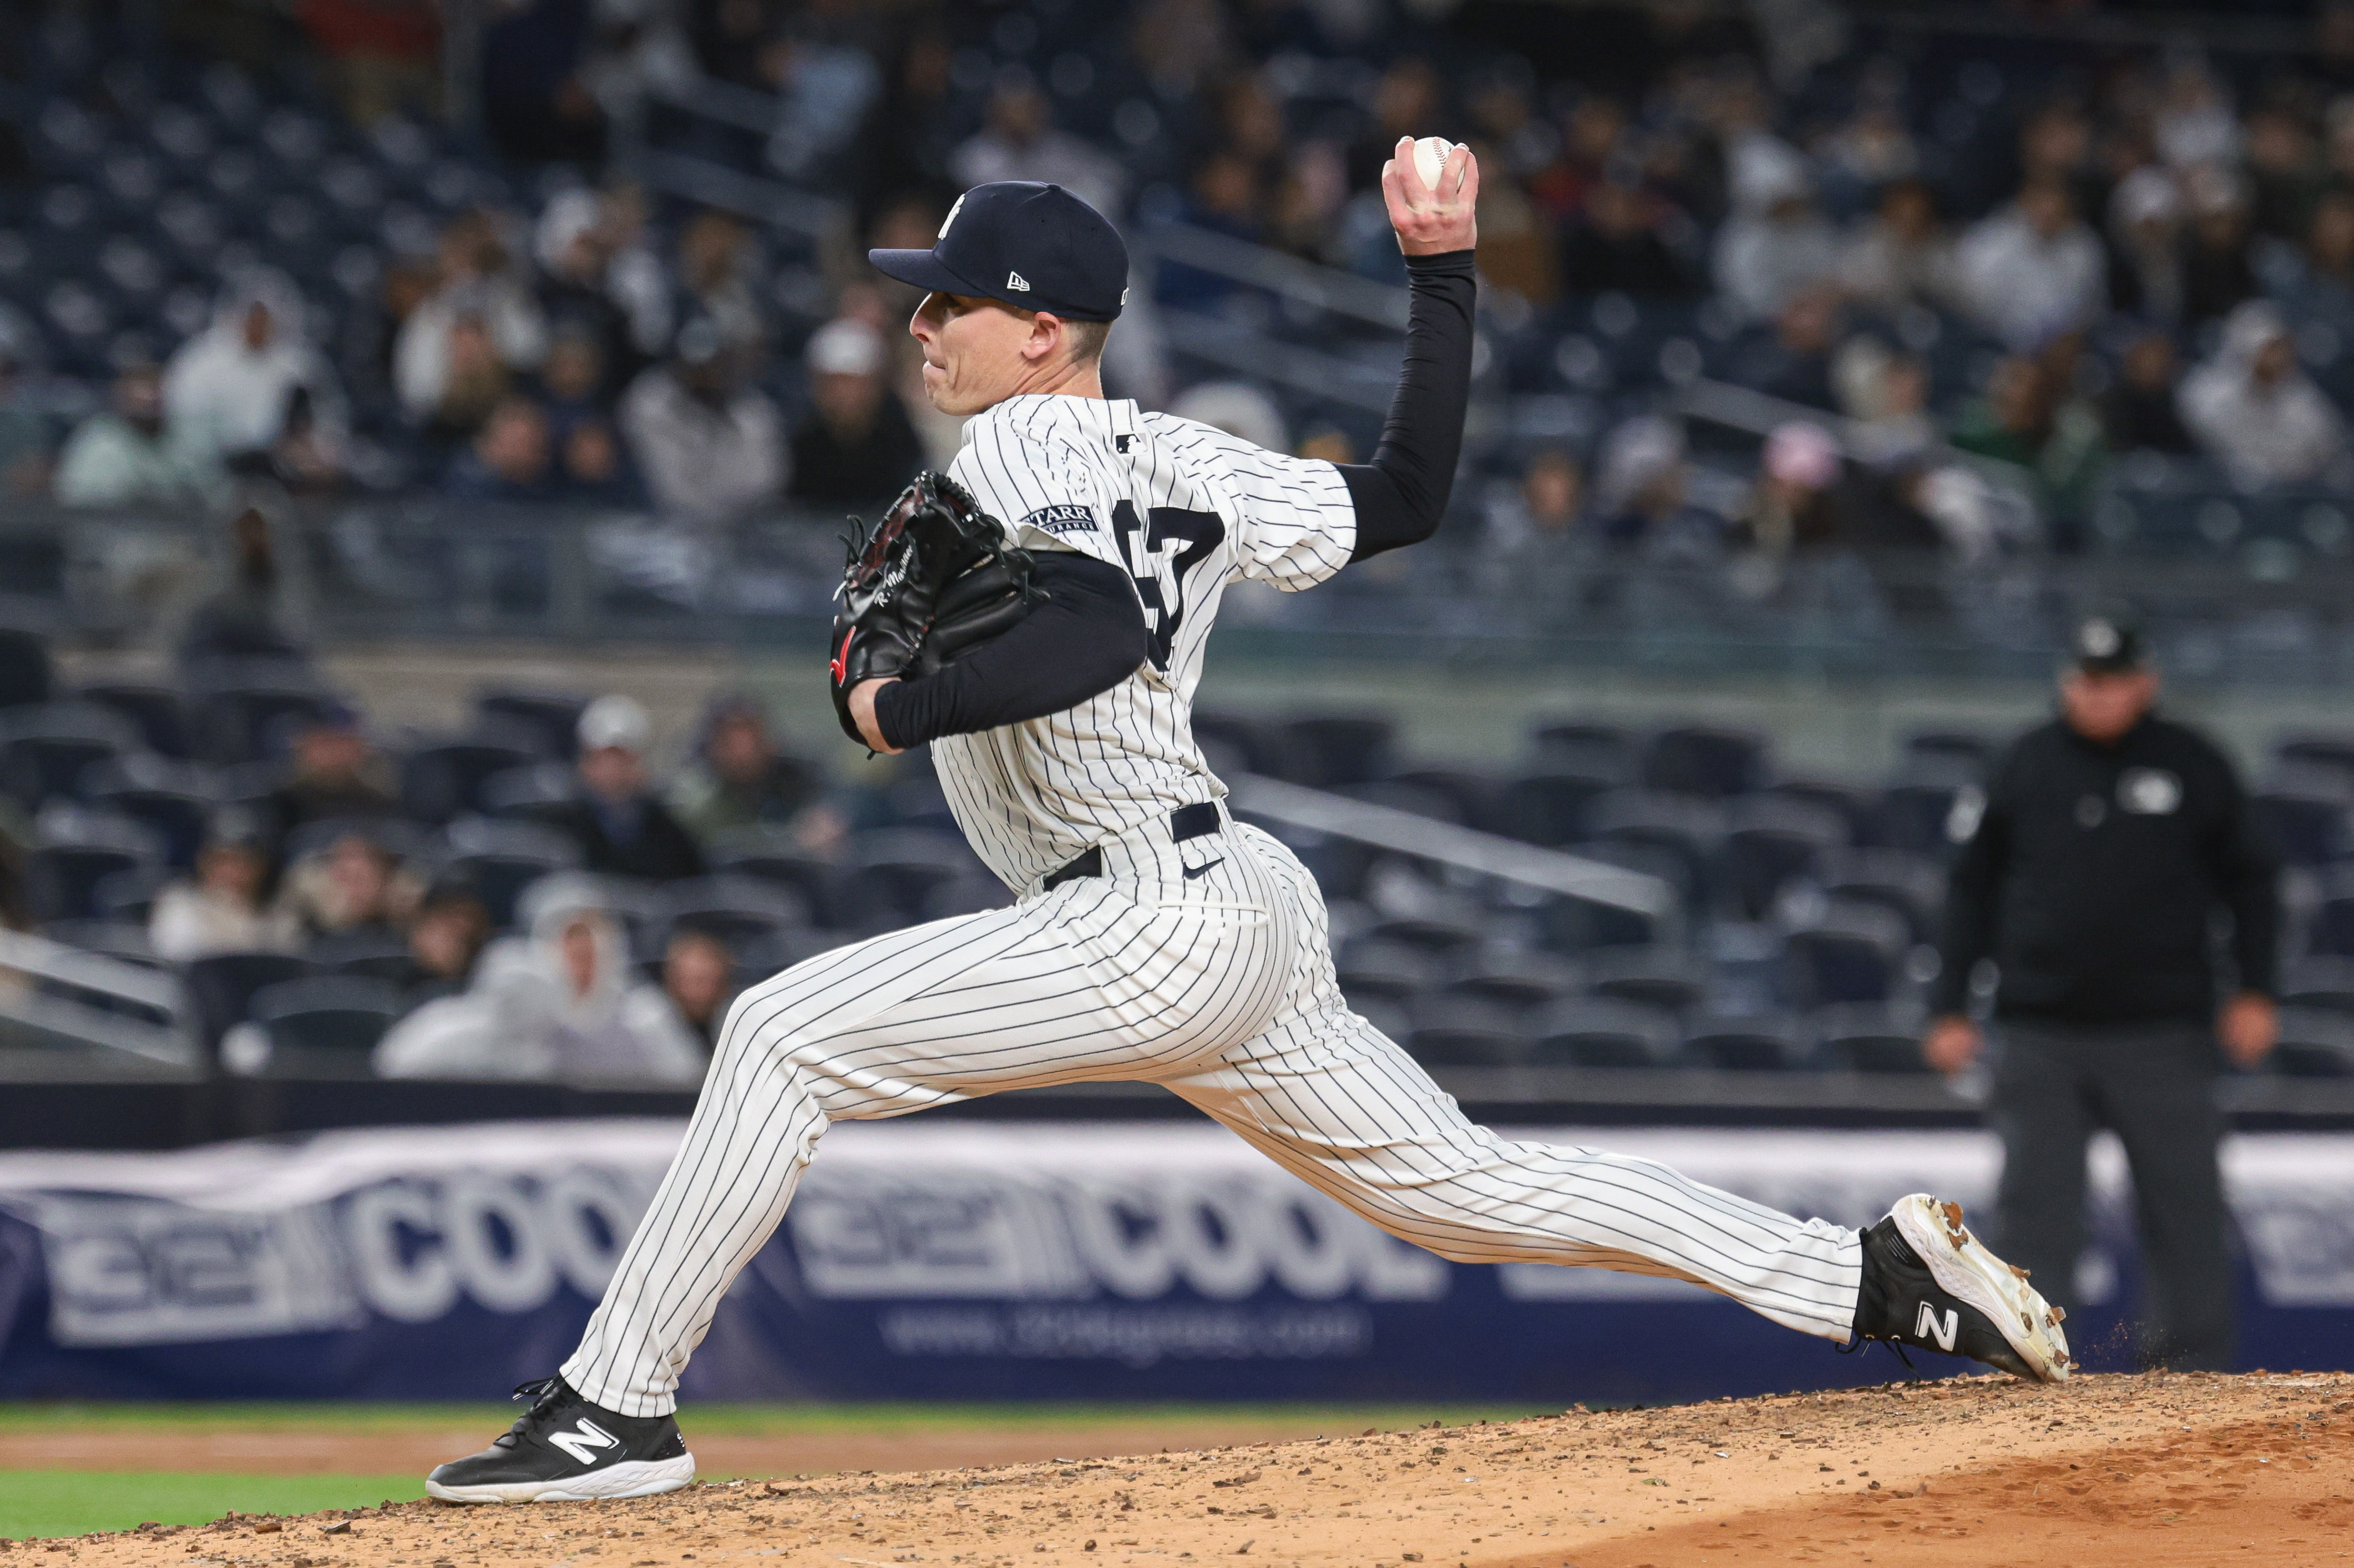 Yankees' struggling bullpen arm may have flipped the script